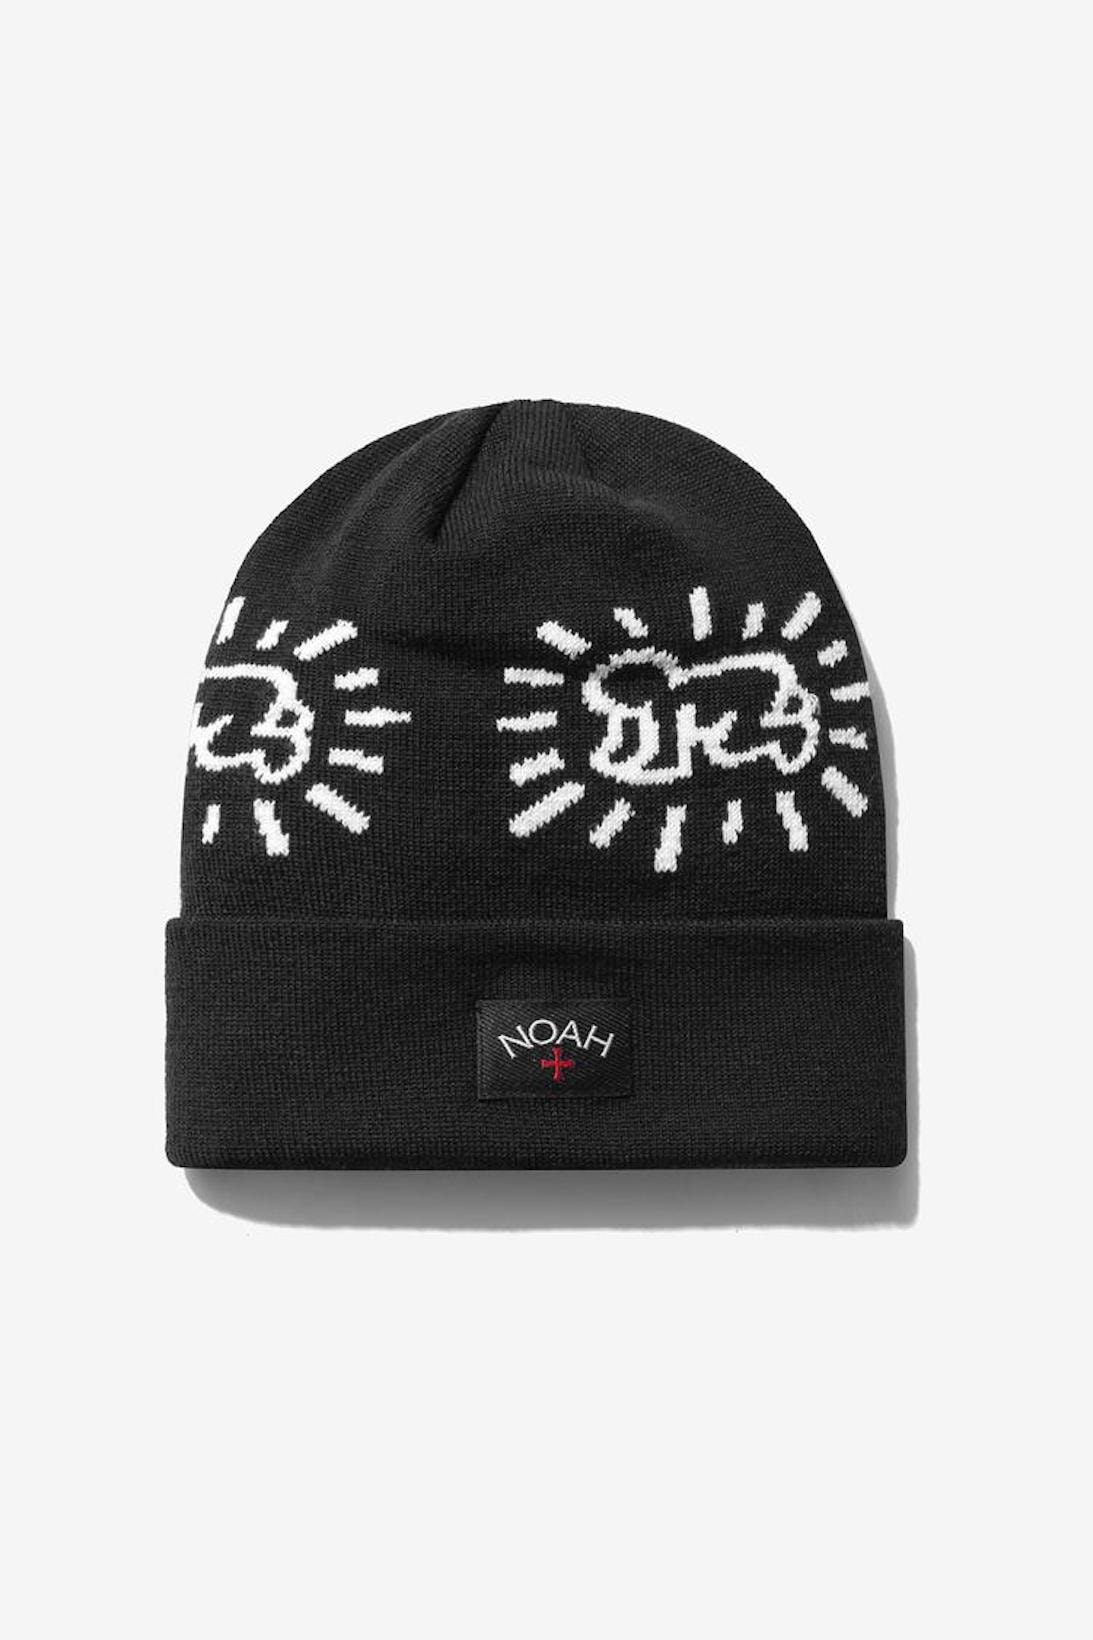 NOAH Keith Haring Christmas Collaboration Collection Beanie